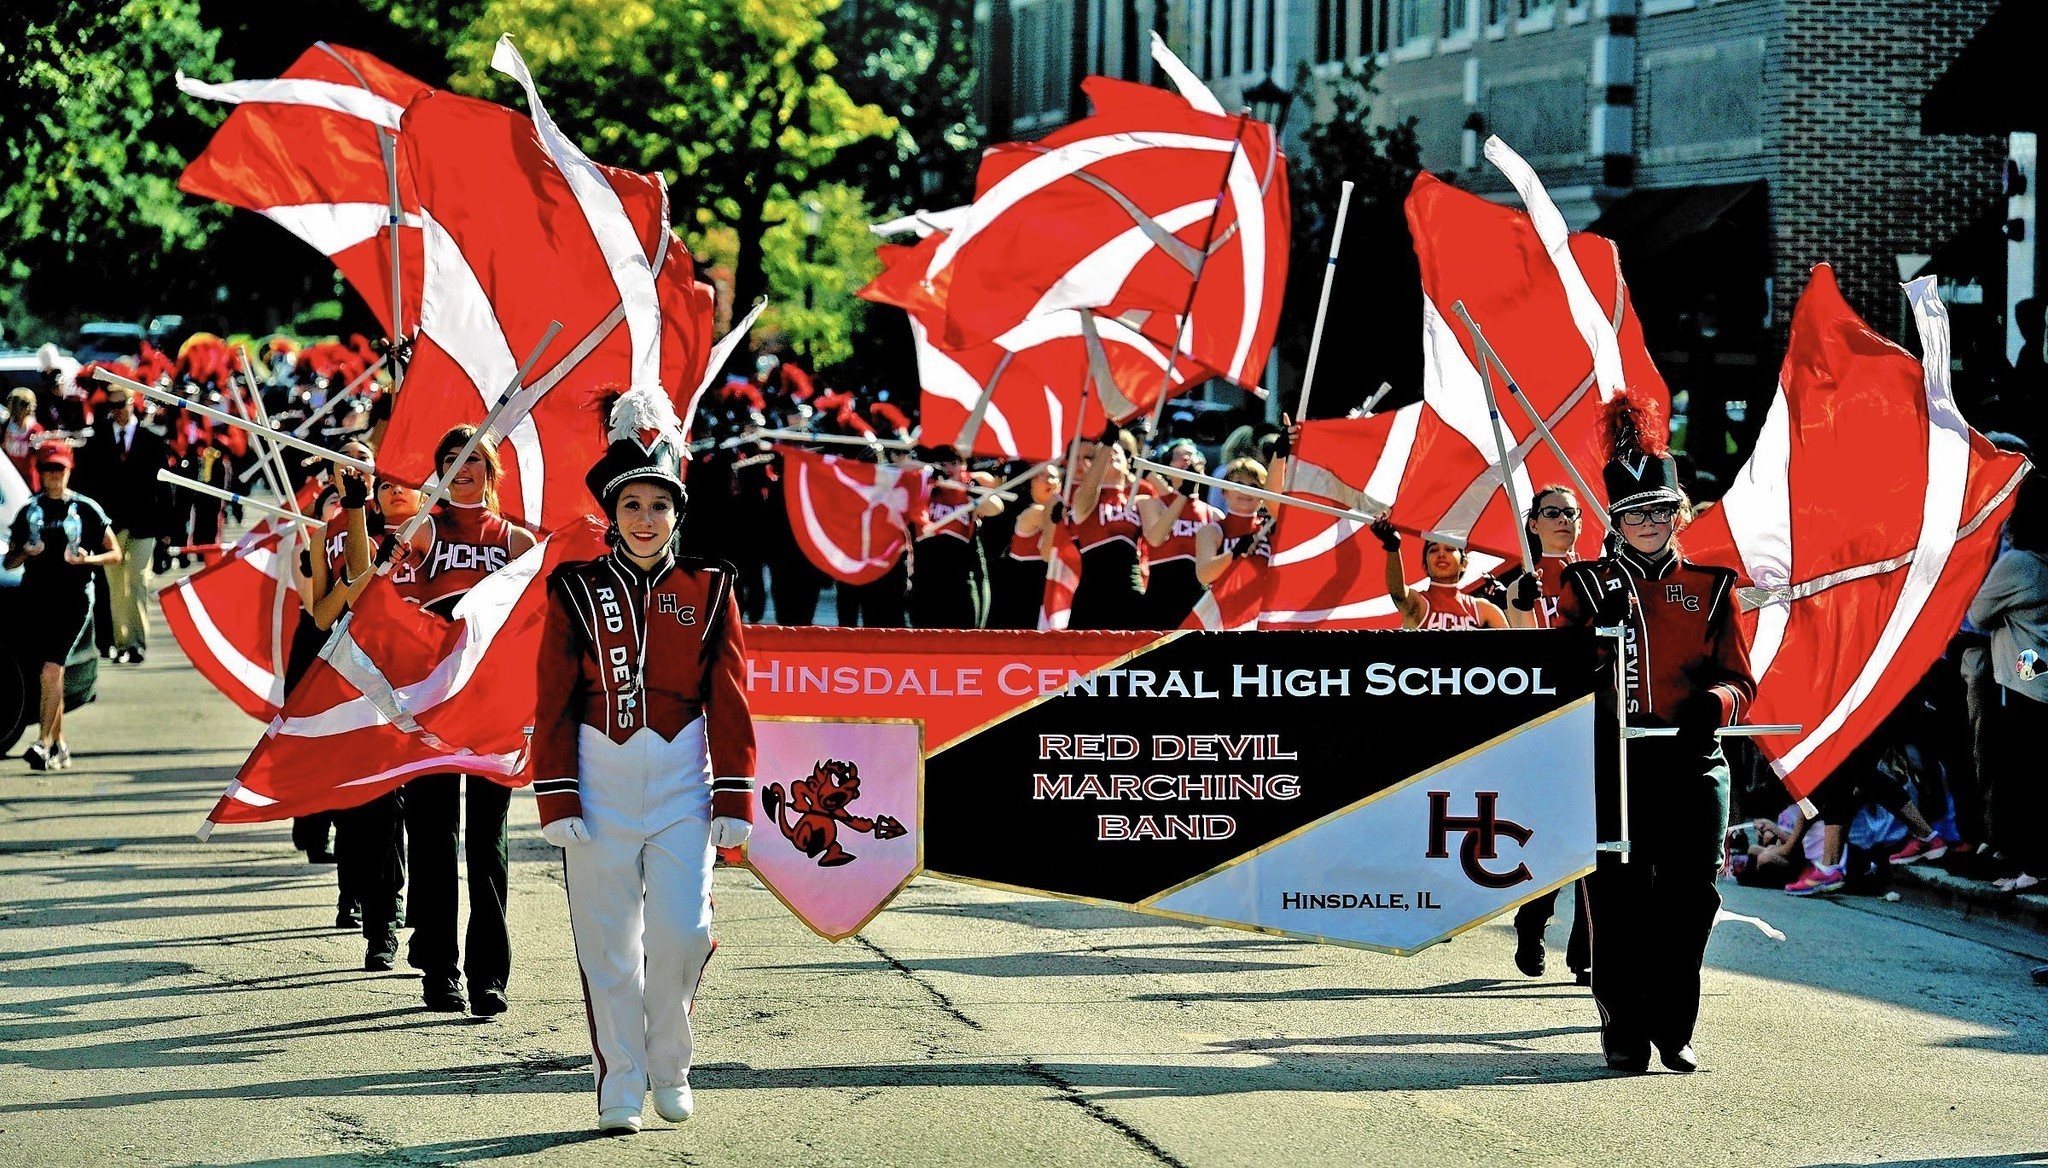 Red Devil spirit parades through Hinsdale The Doings Weekly